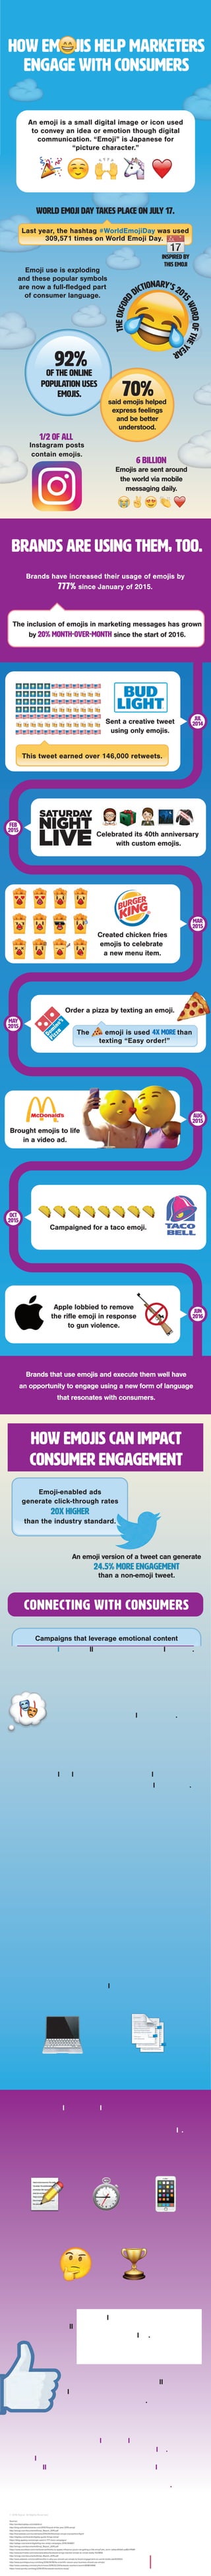 Instagram posts
contain emojis.
1/2 of all
TheOxford
Dictionary's 20
15WordoftheY
ear
Order a pizza by texting an emoji.
The emoji is used 4X MORE than
texting “Easy order!”
Celebrated its 40th anniversary
with custom emojis.
Created chicken fries
emojis to celebrate
a new menu item.
Sent a creative tweet
using only emojis.
This tweet earned over 146,000 retweets.
Campaigned for a taco emoji.
Brought emojis to life
in a video ad.
Apple lobbied to remove
the rifle emoji in response
to gun violence.
Brands that use emojis and execute them well have
an opportunity to engage using a new form of language
that resonates with consumers.
it is relevant
to them
it is important
to them
it is interesting
to them
There are two ways of analyzing emojis to measure
consumer sentiment:
stirs their emotions like to give
their opinion
Software Analysis Manual Analysis
is different than
other ads
it is informative
to them
70% 65%
60% 65% 65%
70%
WHY DO CONSUMERS RESPOND TO ADS
WITH A POSITIVE EMOJI?
Emojis can play a key role in consumer engagement
when brands stay on top of what their audiences
prefer and communicate with them accordingly.
challenges with emojis
Subjectivity
varying usage
across platforms
appropriate execution
tedious segment
analysis
inability to react
to sentiment in real-time
Reactions buttons launched February 2016
which allowed users to respond using more
emoji than just a “like.”
of Reactions on Facebook still consist of
“likes,” which means only 3% of users
are using the new emojis.
97%
An emoji is a small digital image or icon used
to convey an idea or emotion though digital
communication. “Emoji” is Japanese for
“picture character.”
To succeed with emojis, marketers must determine
how consumers are already talking about their
brands and find new ways to provide value. This
includes creating new forms of expression that fit
naturally into existing conversations and leveraging
the way consumers communicate to better
understand their needs and preferences.
Emoji use is exploding
and these popular symbols
are now a full-fledged part
of consumer language.
Brands are using them, too.
Brands have increased their usage of emojis by
777% since January of 2015.
The inclusion of emojis in marketing messages has grown
by 20% month-over-month since the start of 2016.
Emoji-enabled ads
generate click-through rates
20X HIGHER
than the industry standard.
An emoji version of a tweet can generate
24.5% more engagement
than a non-emoji tweet.
Campaigns that leverage emotional content
perform TWICE as well as those with rational content.
Emojis activate the same region of the brain
associated with emotional processing.
Emojis are a valuable source of data that help brands better
understand consumers and how they feel about ads.
79%
How Em jis help marketers
engage with consumers
how emojis can impact
consumer engagement
CONNECTING WITH CONSUMERS
UNDERSTANDING CONSUMERS
Sources:
http://worldemojiday.com/statistics/
http://blog.oxforddictionaries.com/2015/11/word-of-the-year-2015-emoji/
http://emogi.com/documents/Emoji_Report_2015.pdf
http://thenextweb.com/socialmedia/2015/05/04/emojis-emojis-everywhere/#gref
http://digiday.com/brands/digiday-guide-things-emoji/
https://blog.appboy.com/emojis-used-in-777-more-campaigns/
http://adage.com/article/digital/top-ten-emoji-campaigns-2015/301687/
http://emogi.com/documents/Emoji_Report_2015.pdf
https://www.buzzfeed.com/charliewarzel/thanks-to-apples-inﬂuence-youre-not-getting-a-riﬂe-emoji?utm_term=.kdbev9d1d#.sw8EvYRWR
http://www.techradar.com/news/wearables/facebook-brings-reaction-emojis-to-virtual-reality-1323856
http://emogi.com/documents/Emoji_Report_2015.pdf
http://www.adweek.com/socialtimes/this-is-why-you-should-use-emojis-to-boost-engagement-on-social-media-ads/633503
http://www.quicktapsurvey.com/blog/2016/04/18/the-scientiﬁc-reason-your-business-should-use-emojis/
http://www.usatoday.com/story/tech/news/2016/02/24/facebook-reactions-launch/80803468/
https://www.quintly.com/blog/2016/05/facebook-reactions-study/
jis
JUL
2014
mar
2015
aug
2015
JUn
2016
feb
2015
may
2015
oct
2015
World Emoji Day takes place on July 17.
Last year, the hashtag #WorldEmojiDay was used
309,571 times on World Emoji Day.
inspired by
this emoji
said emojis helped
express feelings
and be better
understood.
70%
92%
emojis.
of the online
population uses
Emojis are sent around
the world via mobile
messaging daily.
6 BILLION
© 2016 Signal. All Rights Reserved.
 